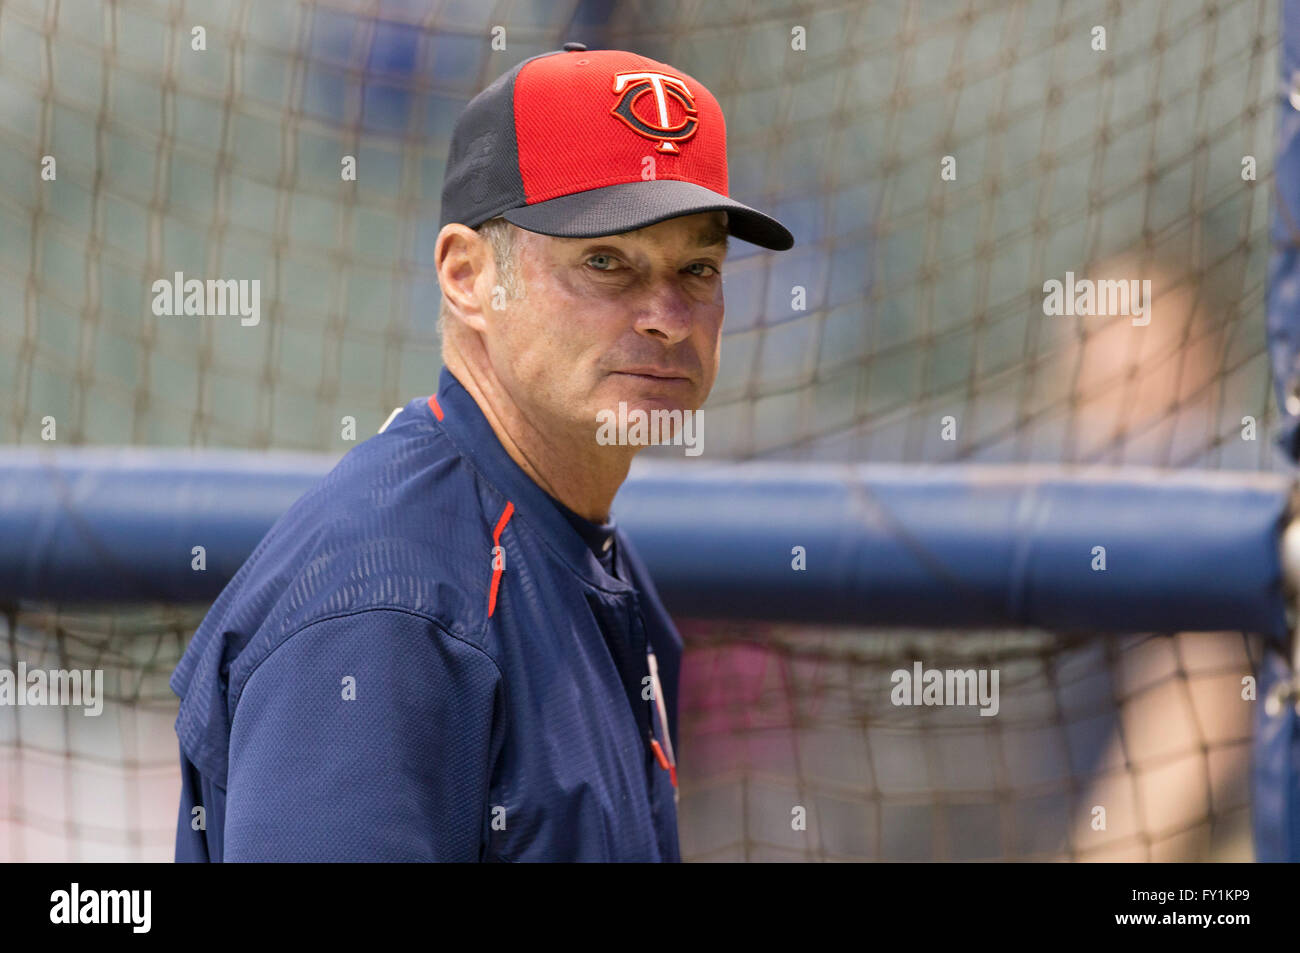 Twins' Paul Molitor returns to Milwaukee, the city that made him famous